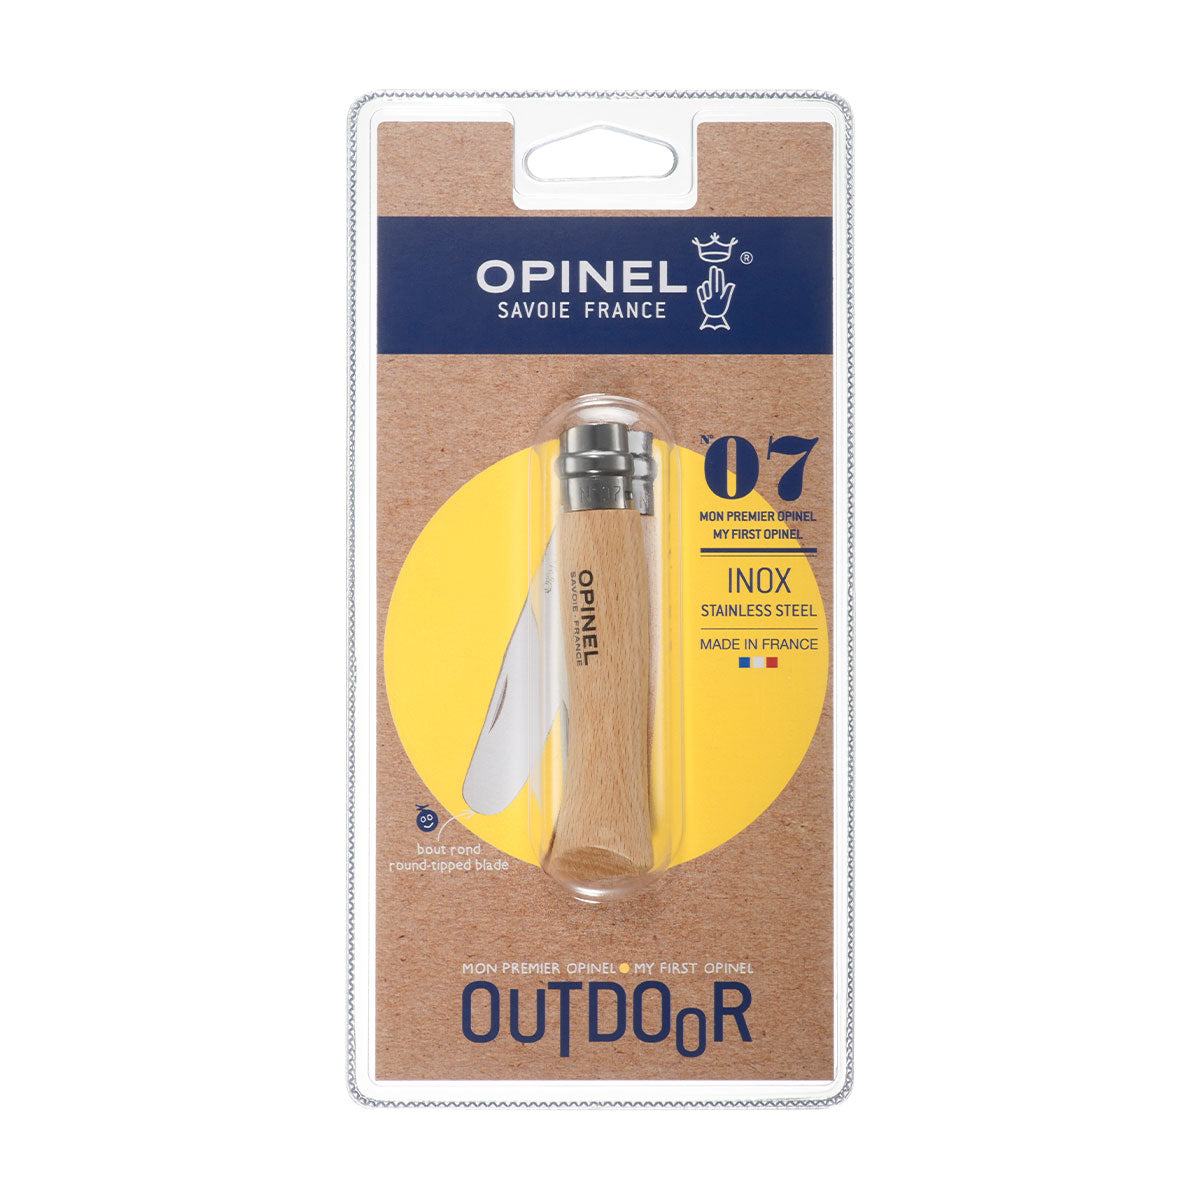 My First Opinel #07 Round Ended Natural -  - Mansfield Hunting & Fishing - Products to prepare for Corona Virus